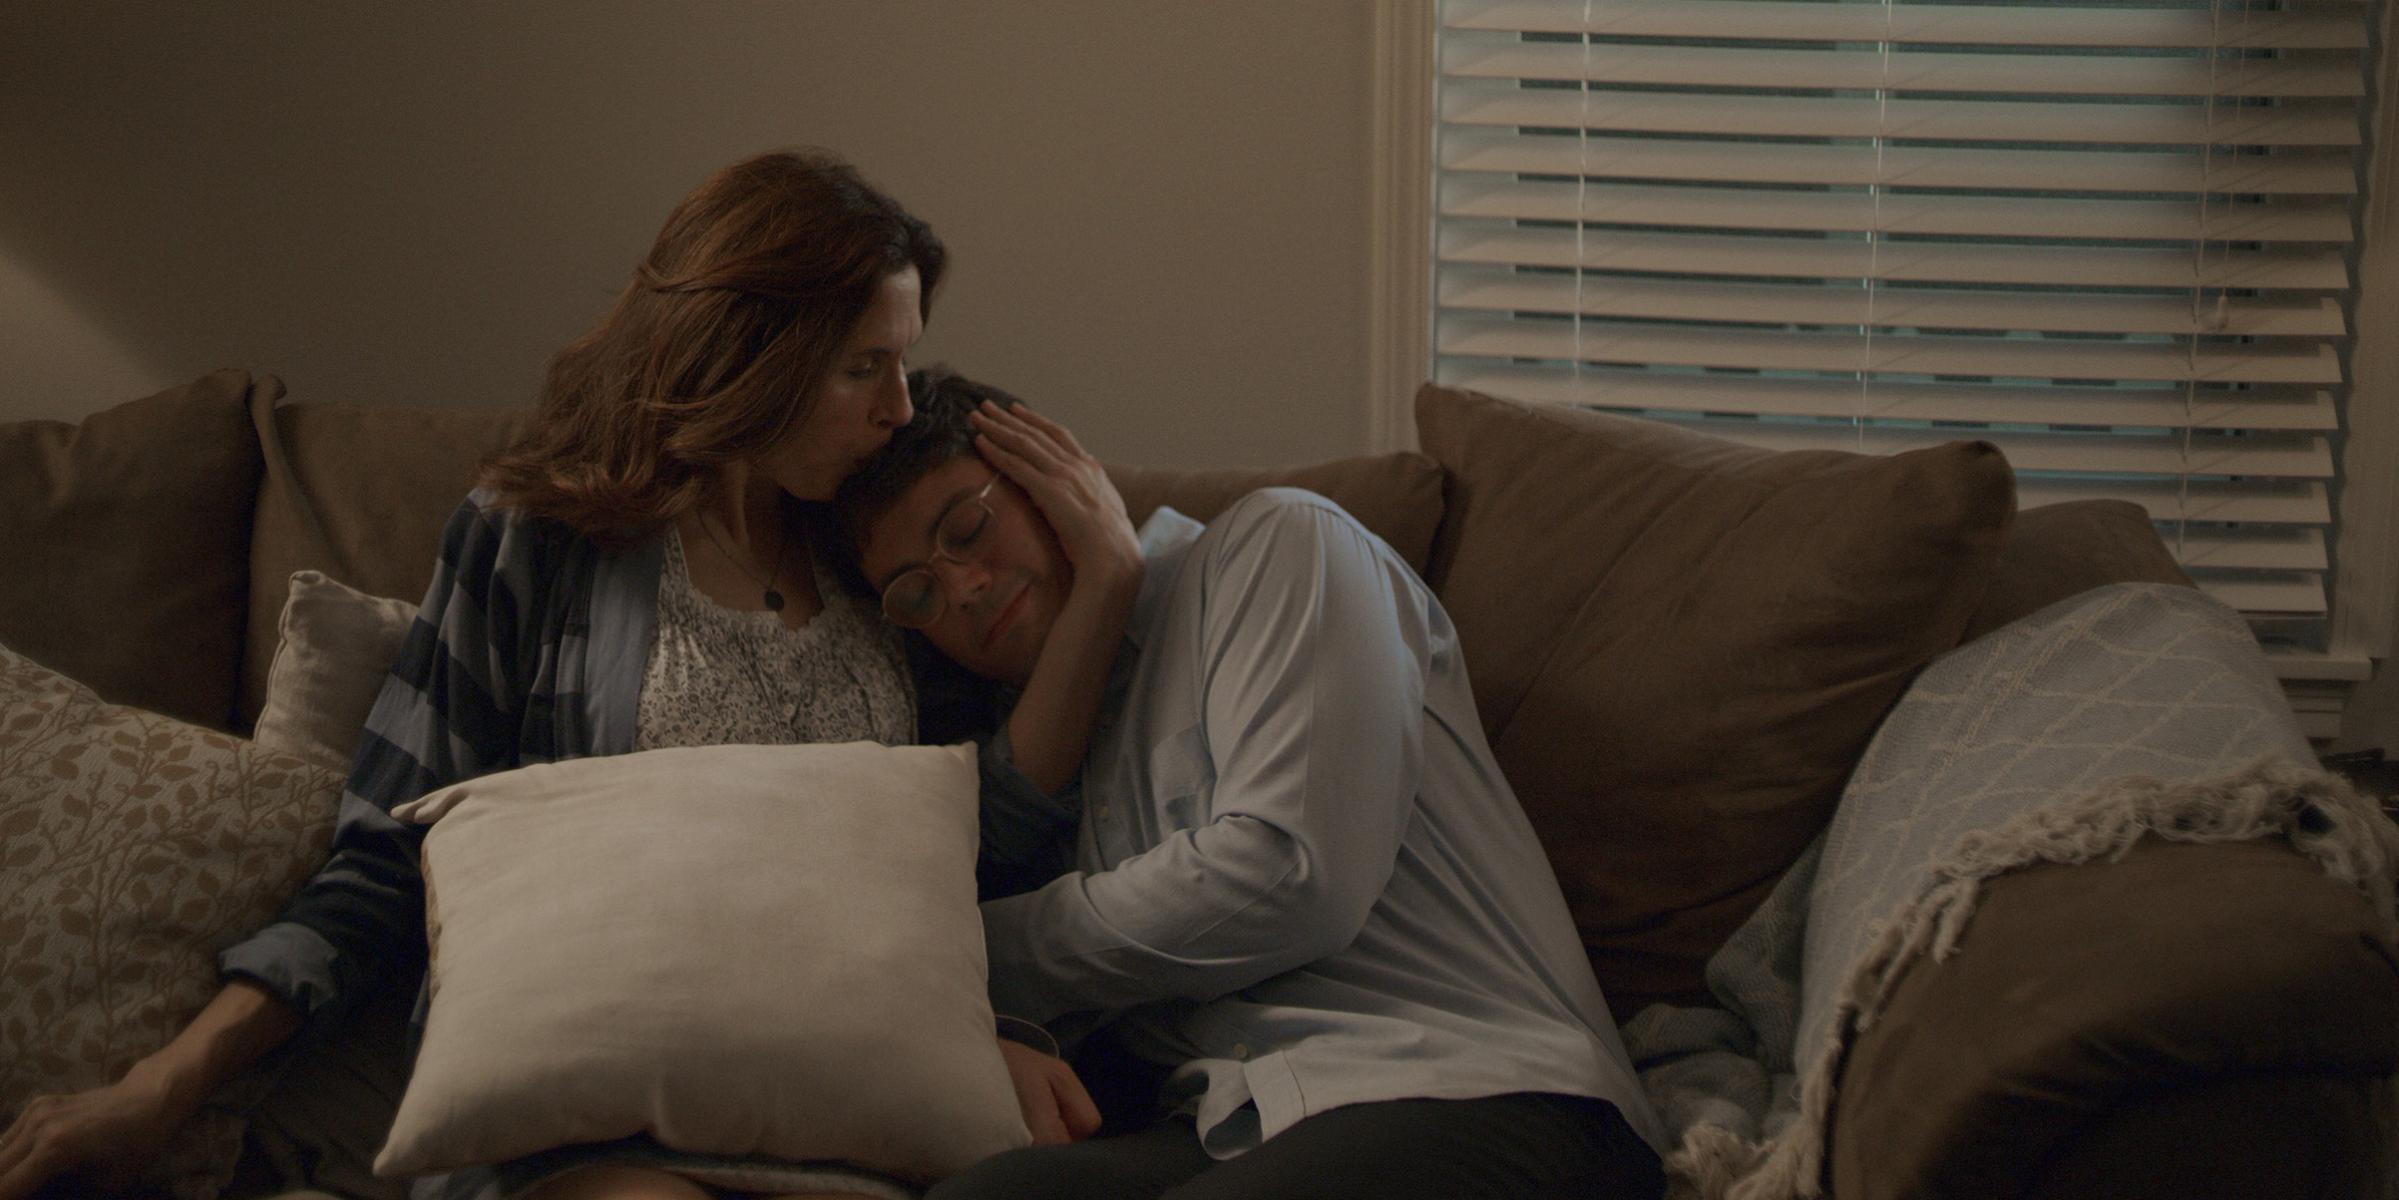 O’Connell based the enmeshed mother-son relationship in Special on his own, imagining what it might be like if Ryan’s mom (Jessica Hecht) took the time to focus on her own needs